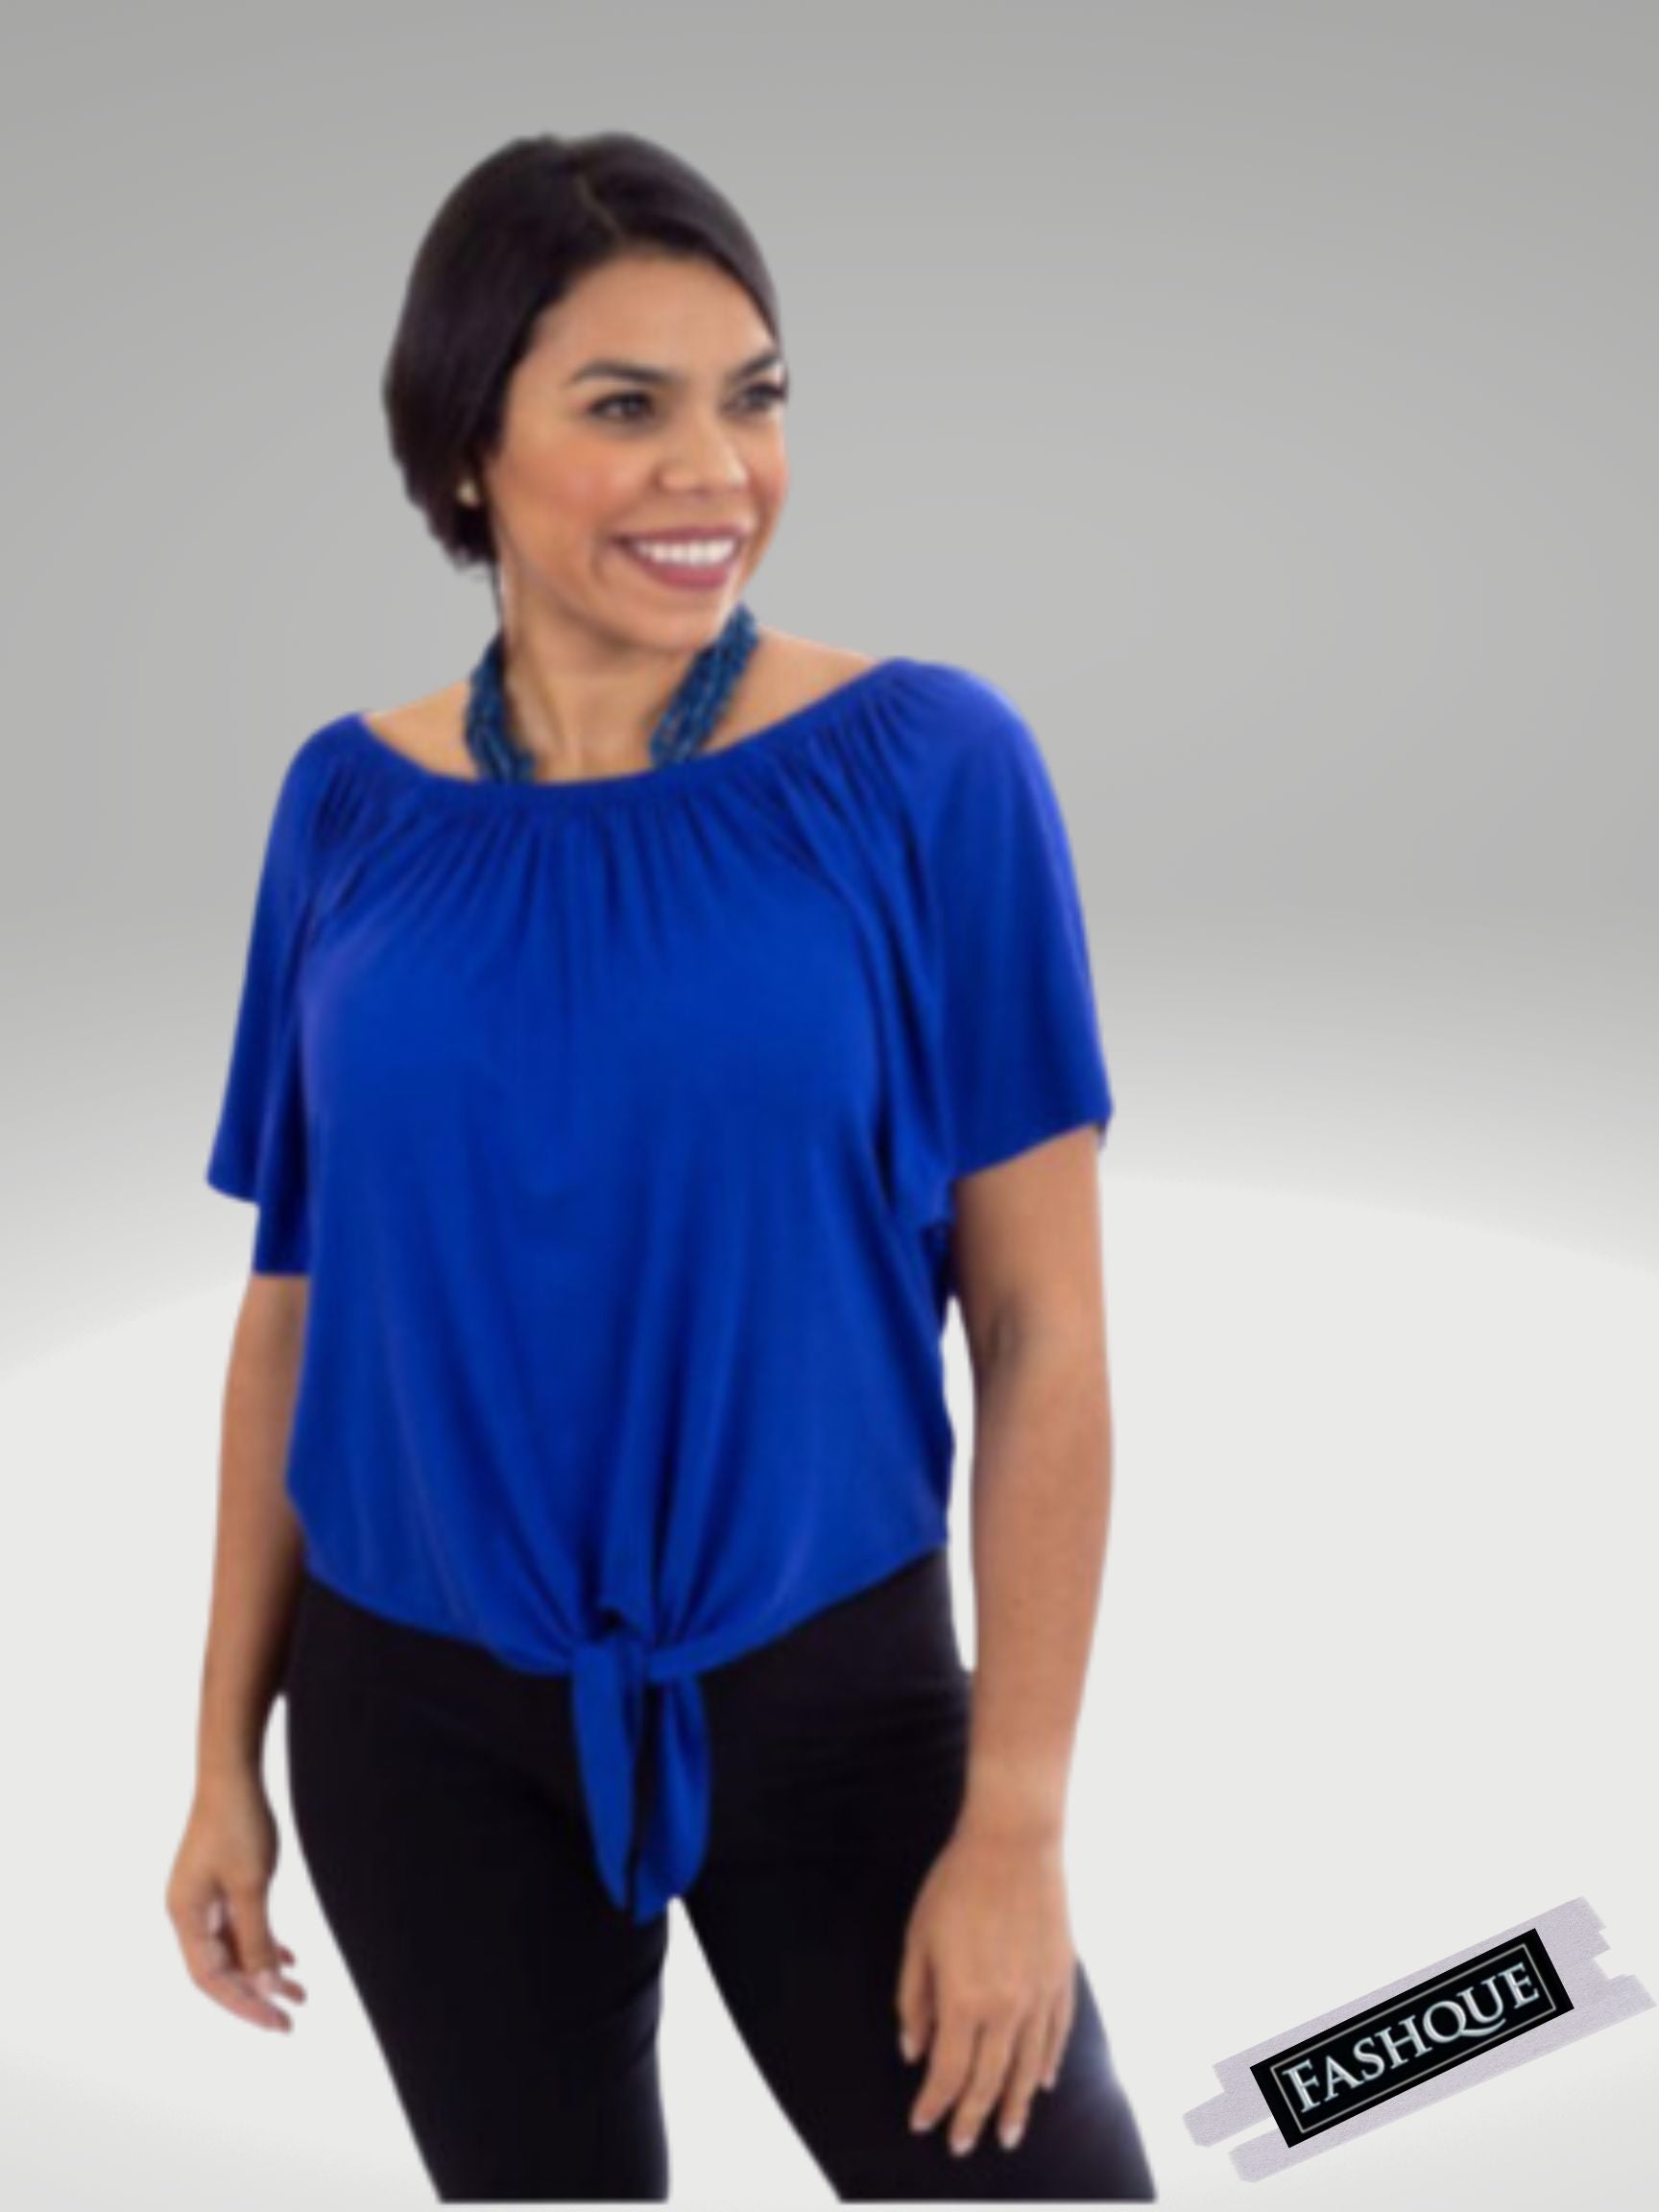 FASHQUE - Asymmetrical OFF Shoulder top with a knot detail - T509